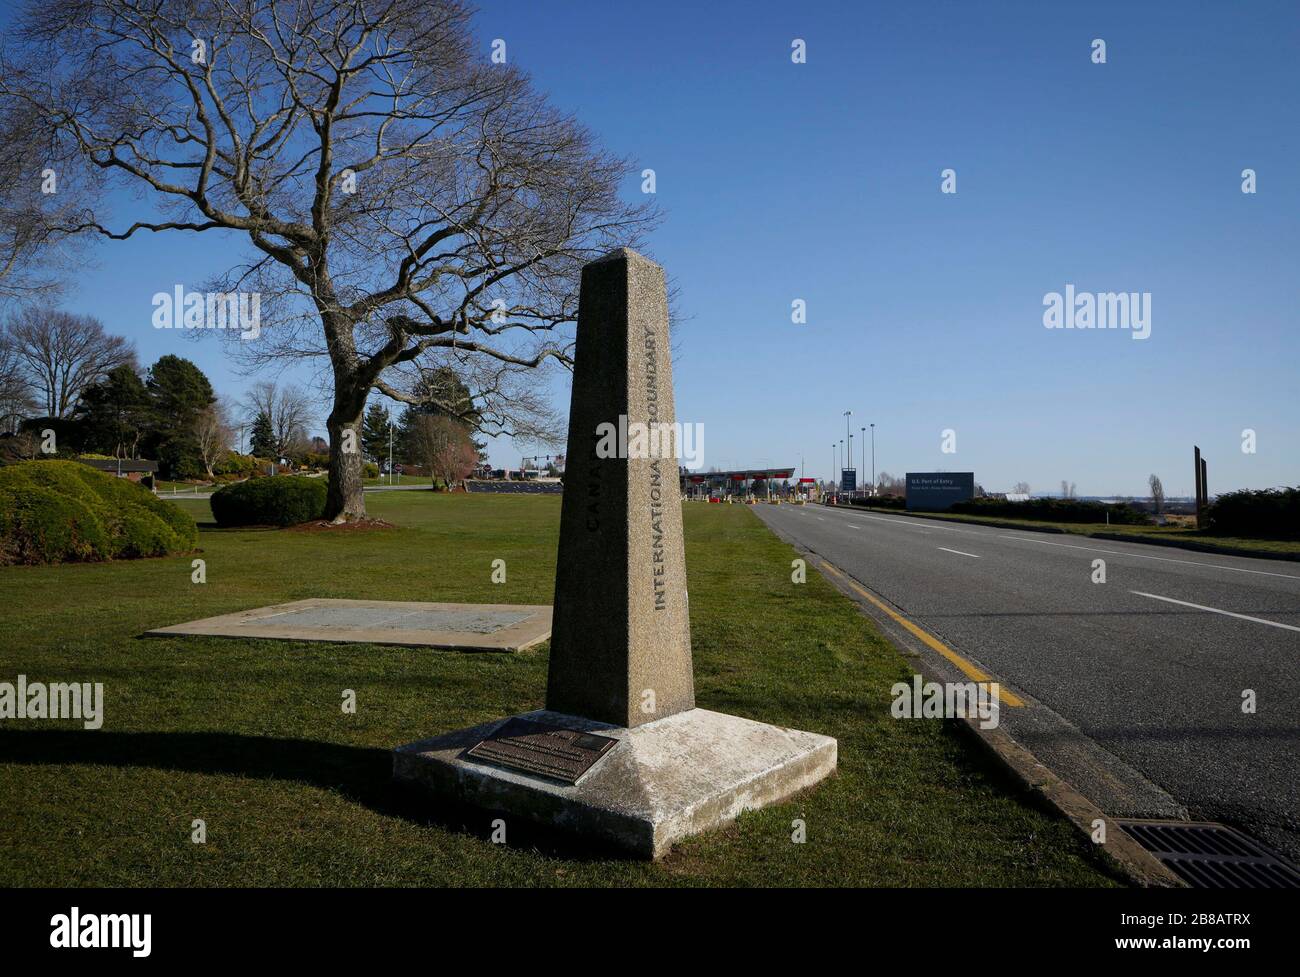 Vancouver, Canada. 20th Mar, 2020. Empty road is seen in front of a monument marking the geographical border between Canada and the U.S. at Douglas-Peace Arch border crossing in Surrey, Canada, March 20, 2020. Canadian Prime Minister Justin Trudeau announced that the Canada-U.S. border will close to non-essential travel at midnight Friday and both countries will turn back asylum seekers crossing the border. Credit: Liang Sen/Xinhua/Alamy Live News Stock Photo